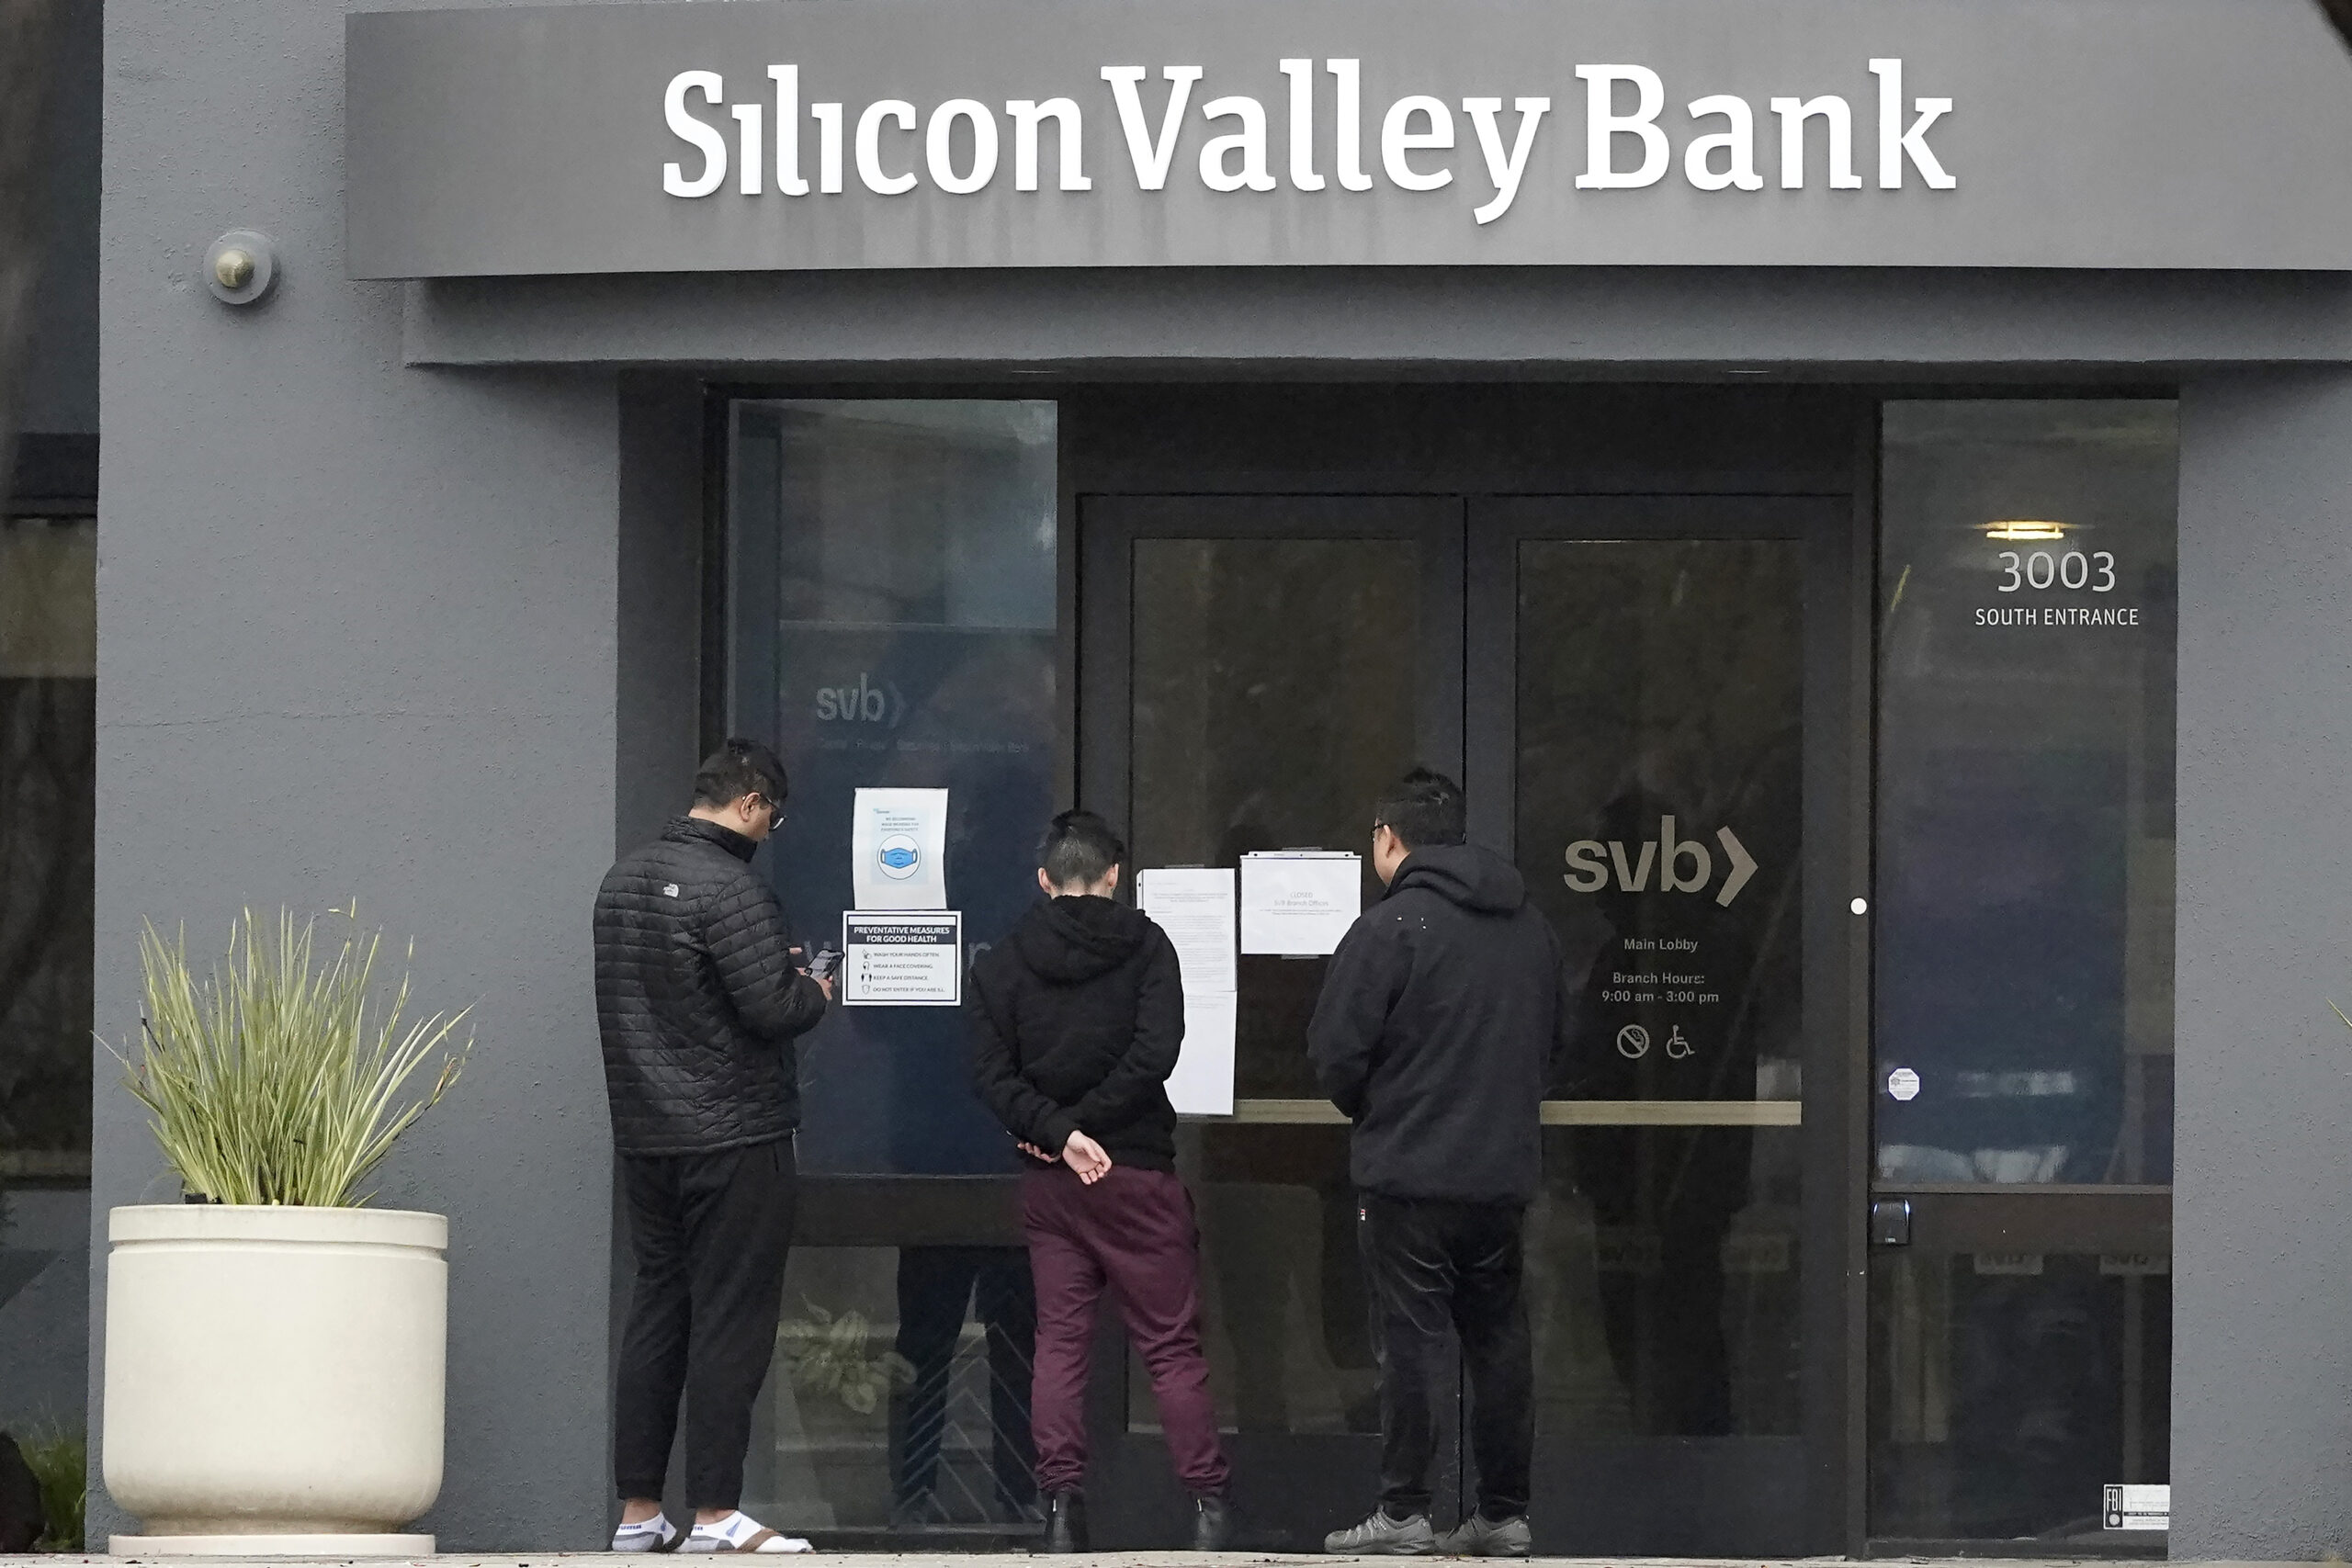 Silicon Valley Bank shut down on Friday